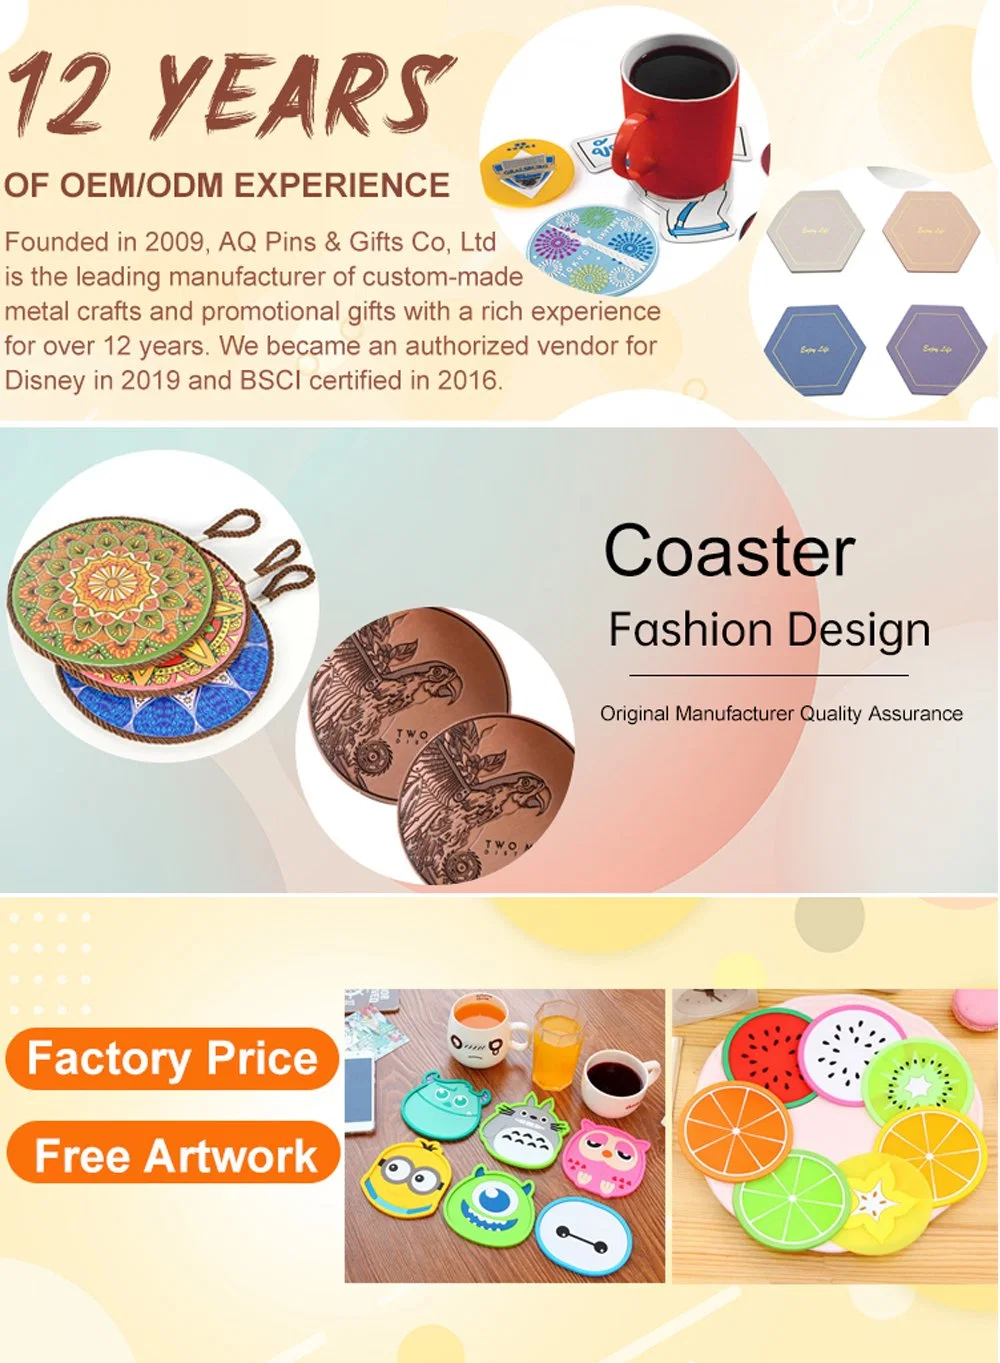 Hot Selling Round Shape Table or Bar Mat Cup Warmer Pad Portable Coffee Mug Heating Beverage Tea Bio Disc Soft PVC Rubber Coaster Tablemat